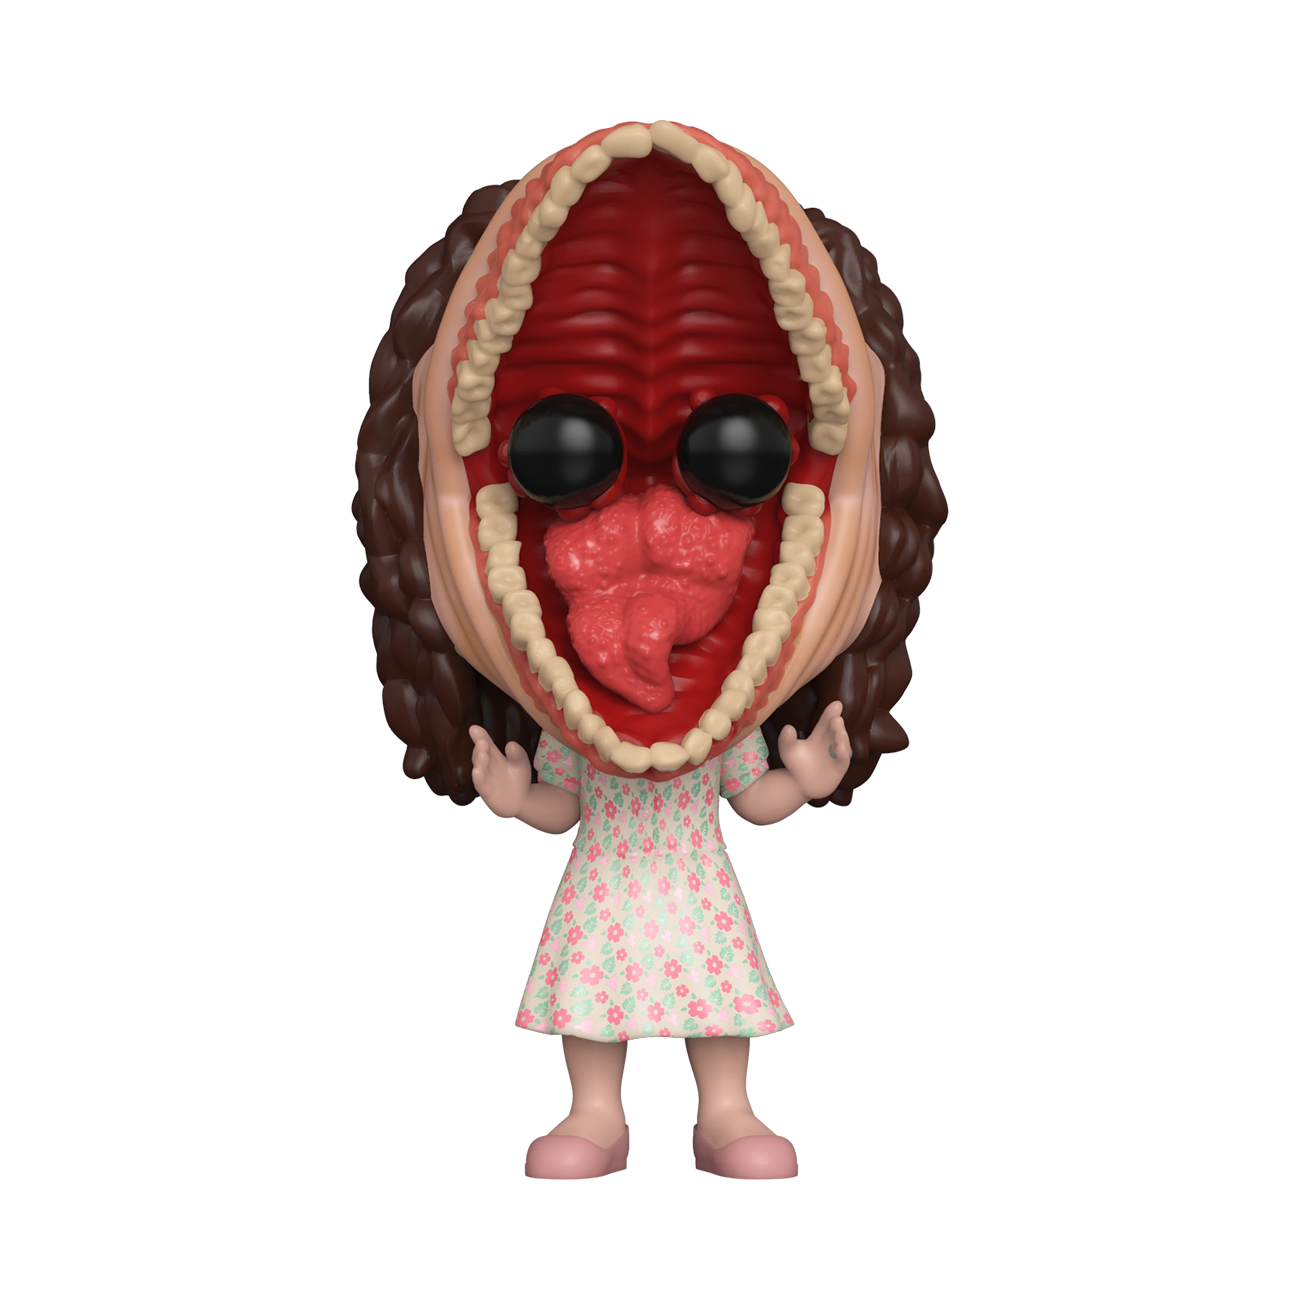 This is a Barbara Maitland Beetlejuice Funko Pop and she has pink shoes, pink dress with flowers, brown hair, black eyes and he mouth is open showing her teeth and tongue.